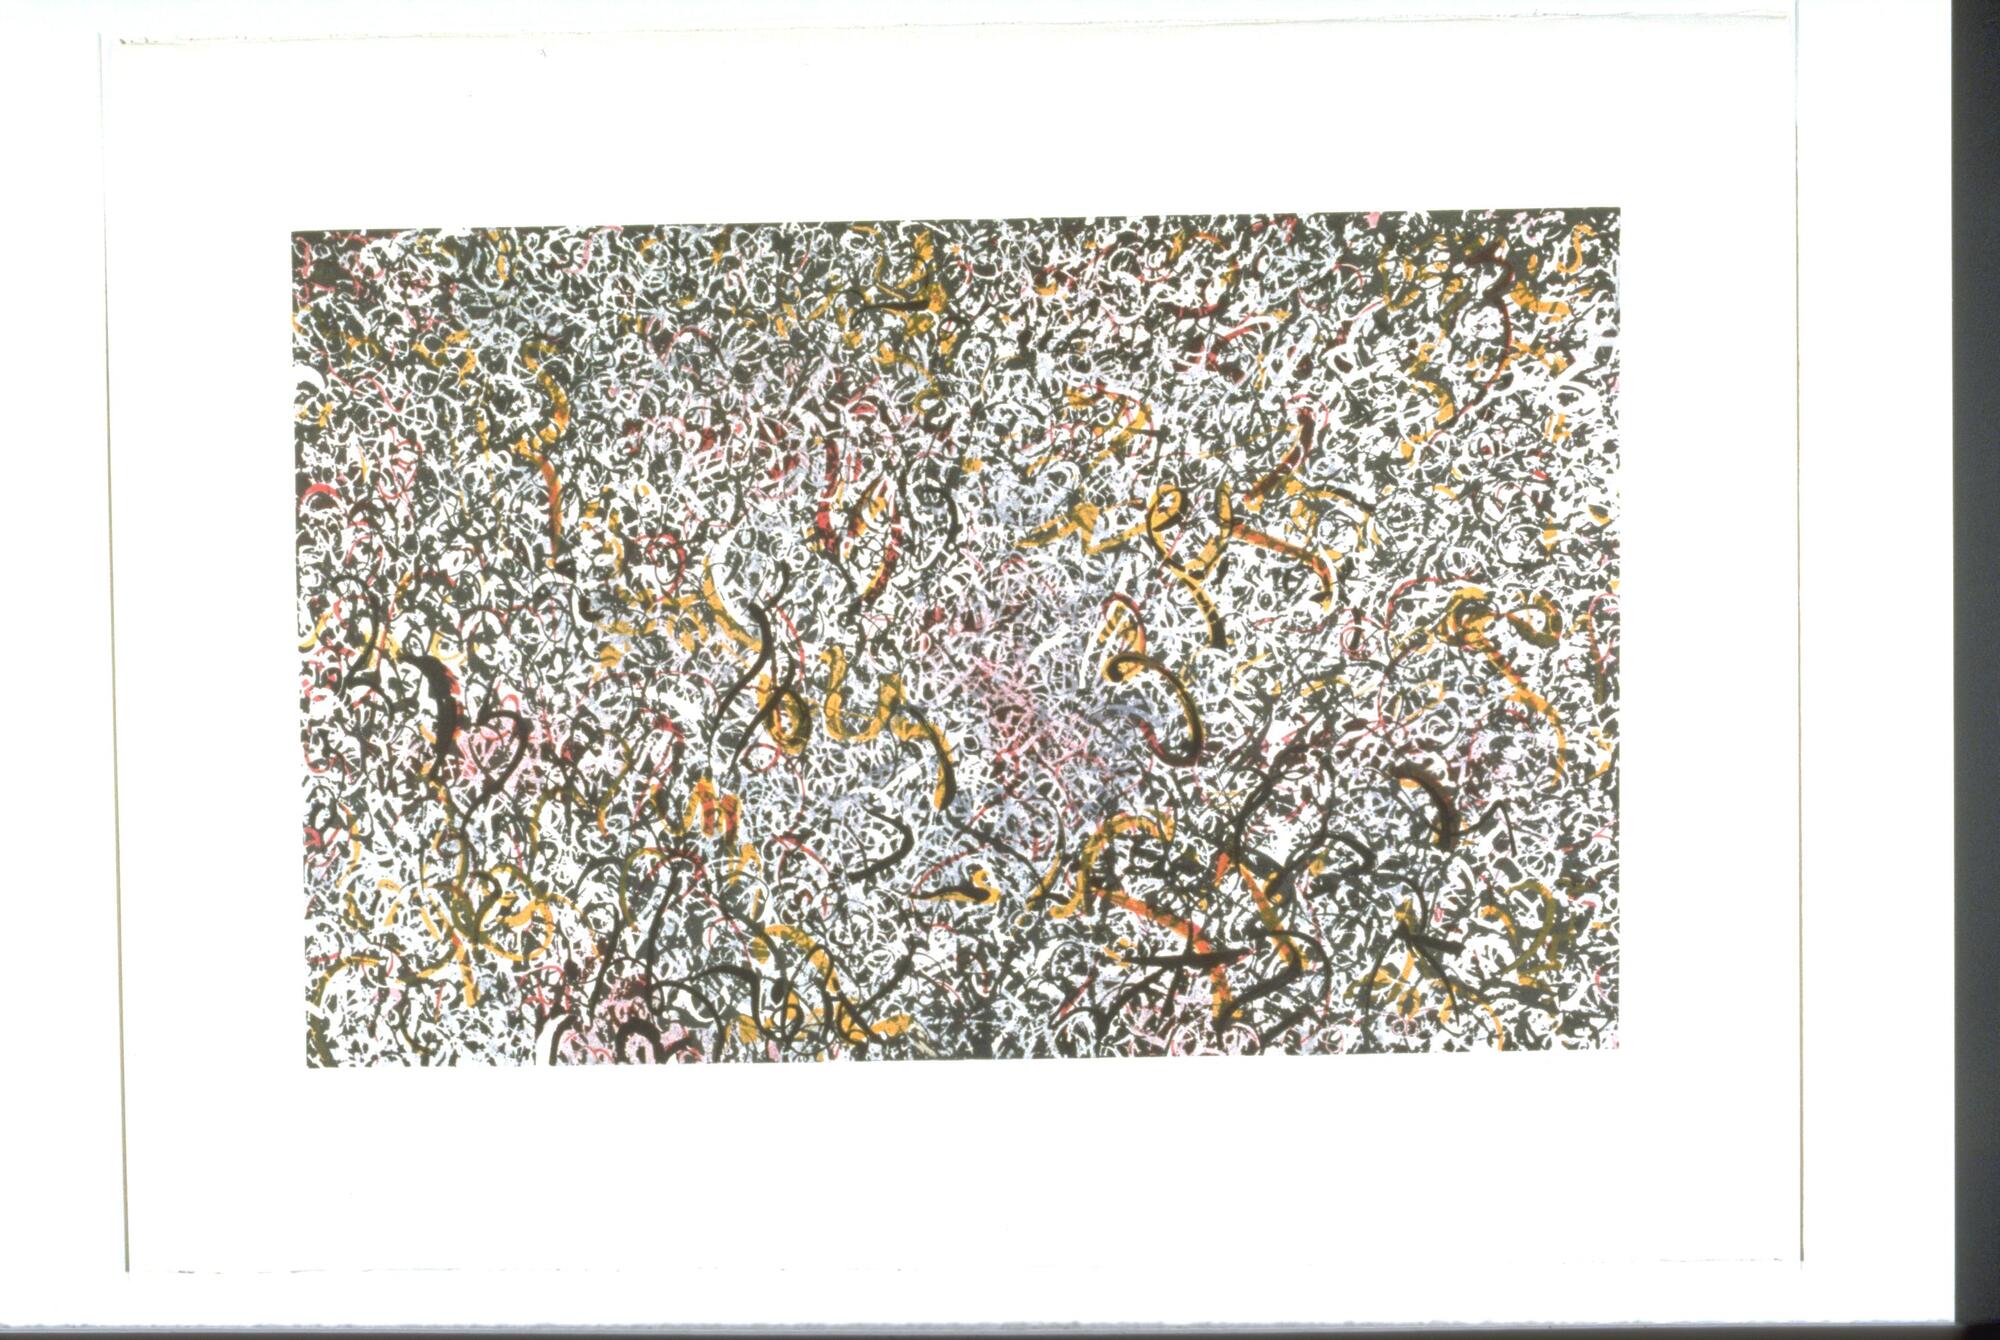 This abstract color lithograph is made up of swirling lines and patterns of white, black, orange, pink and green inks. These forms make up an all-over image and appear similar to splatters or drips of ink. The print is signed and dated (l.r.) "Tobey 1970" and editioned (l.l.) "19/200" in pencil.